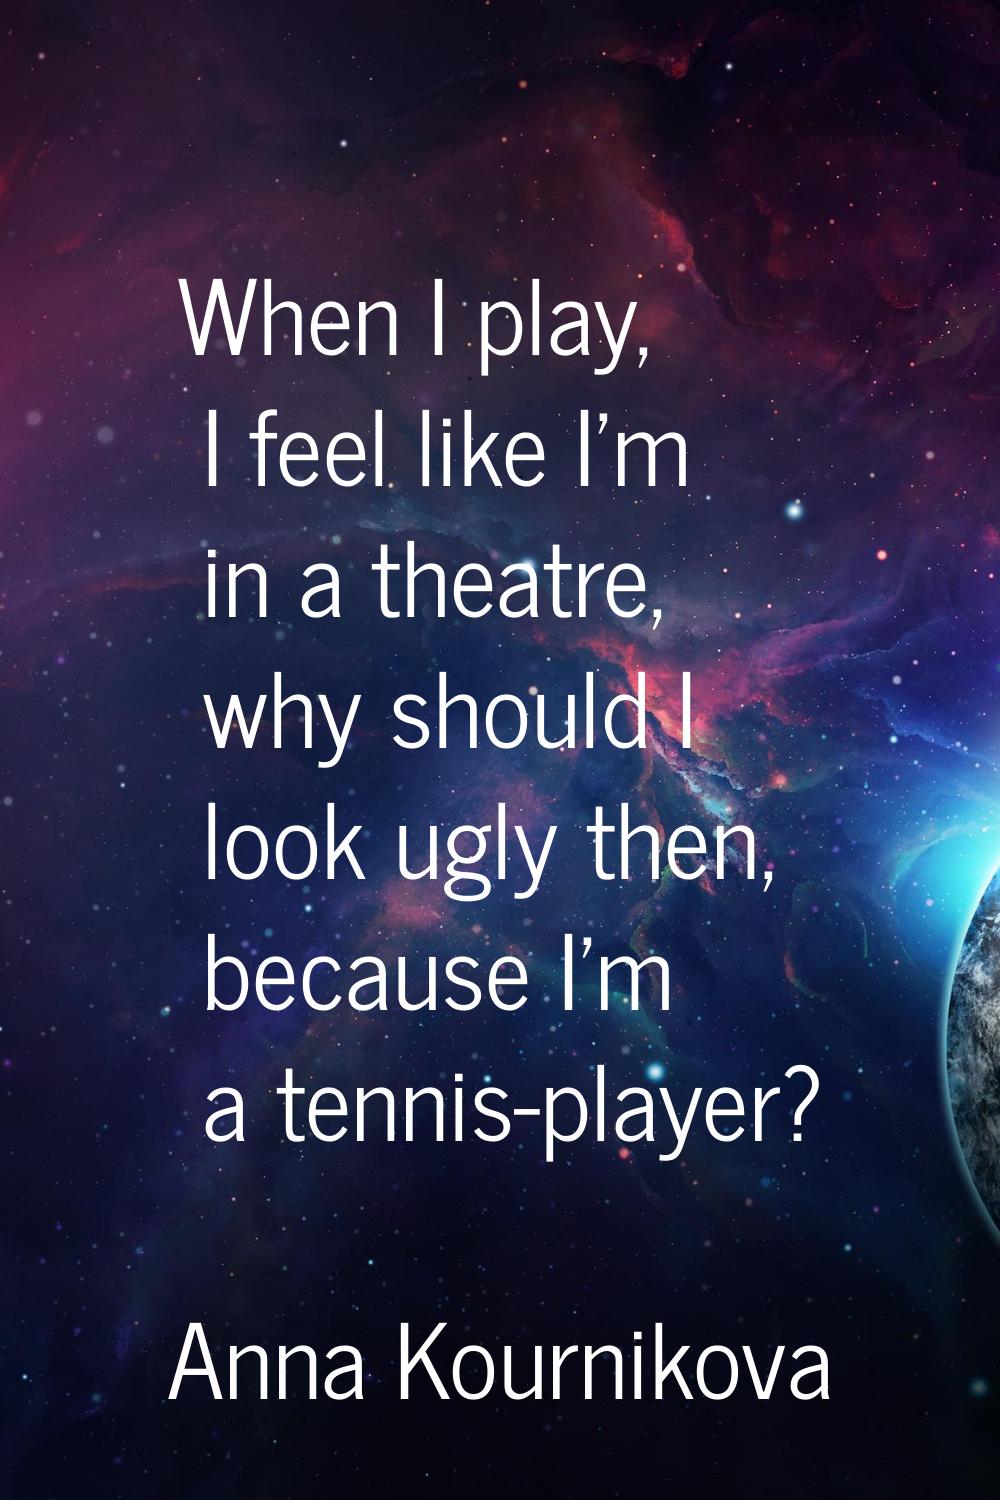 When I play, I feel like I'm in a theatre, why should I look ugly then, because I'm a tennis-player